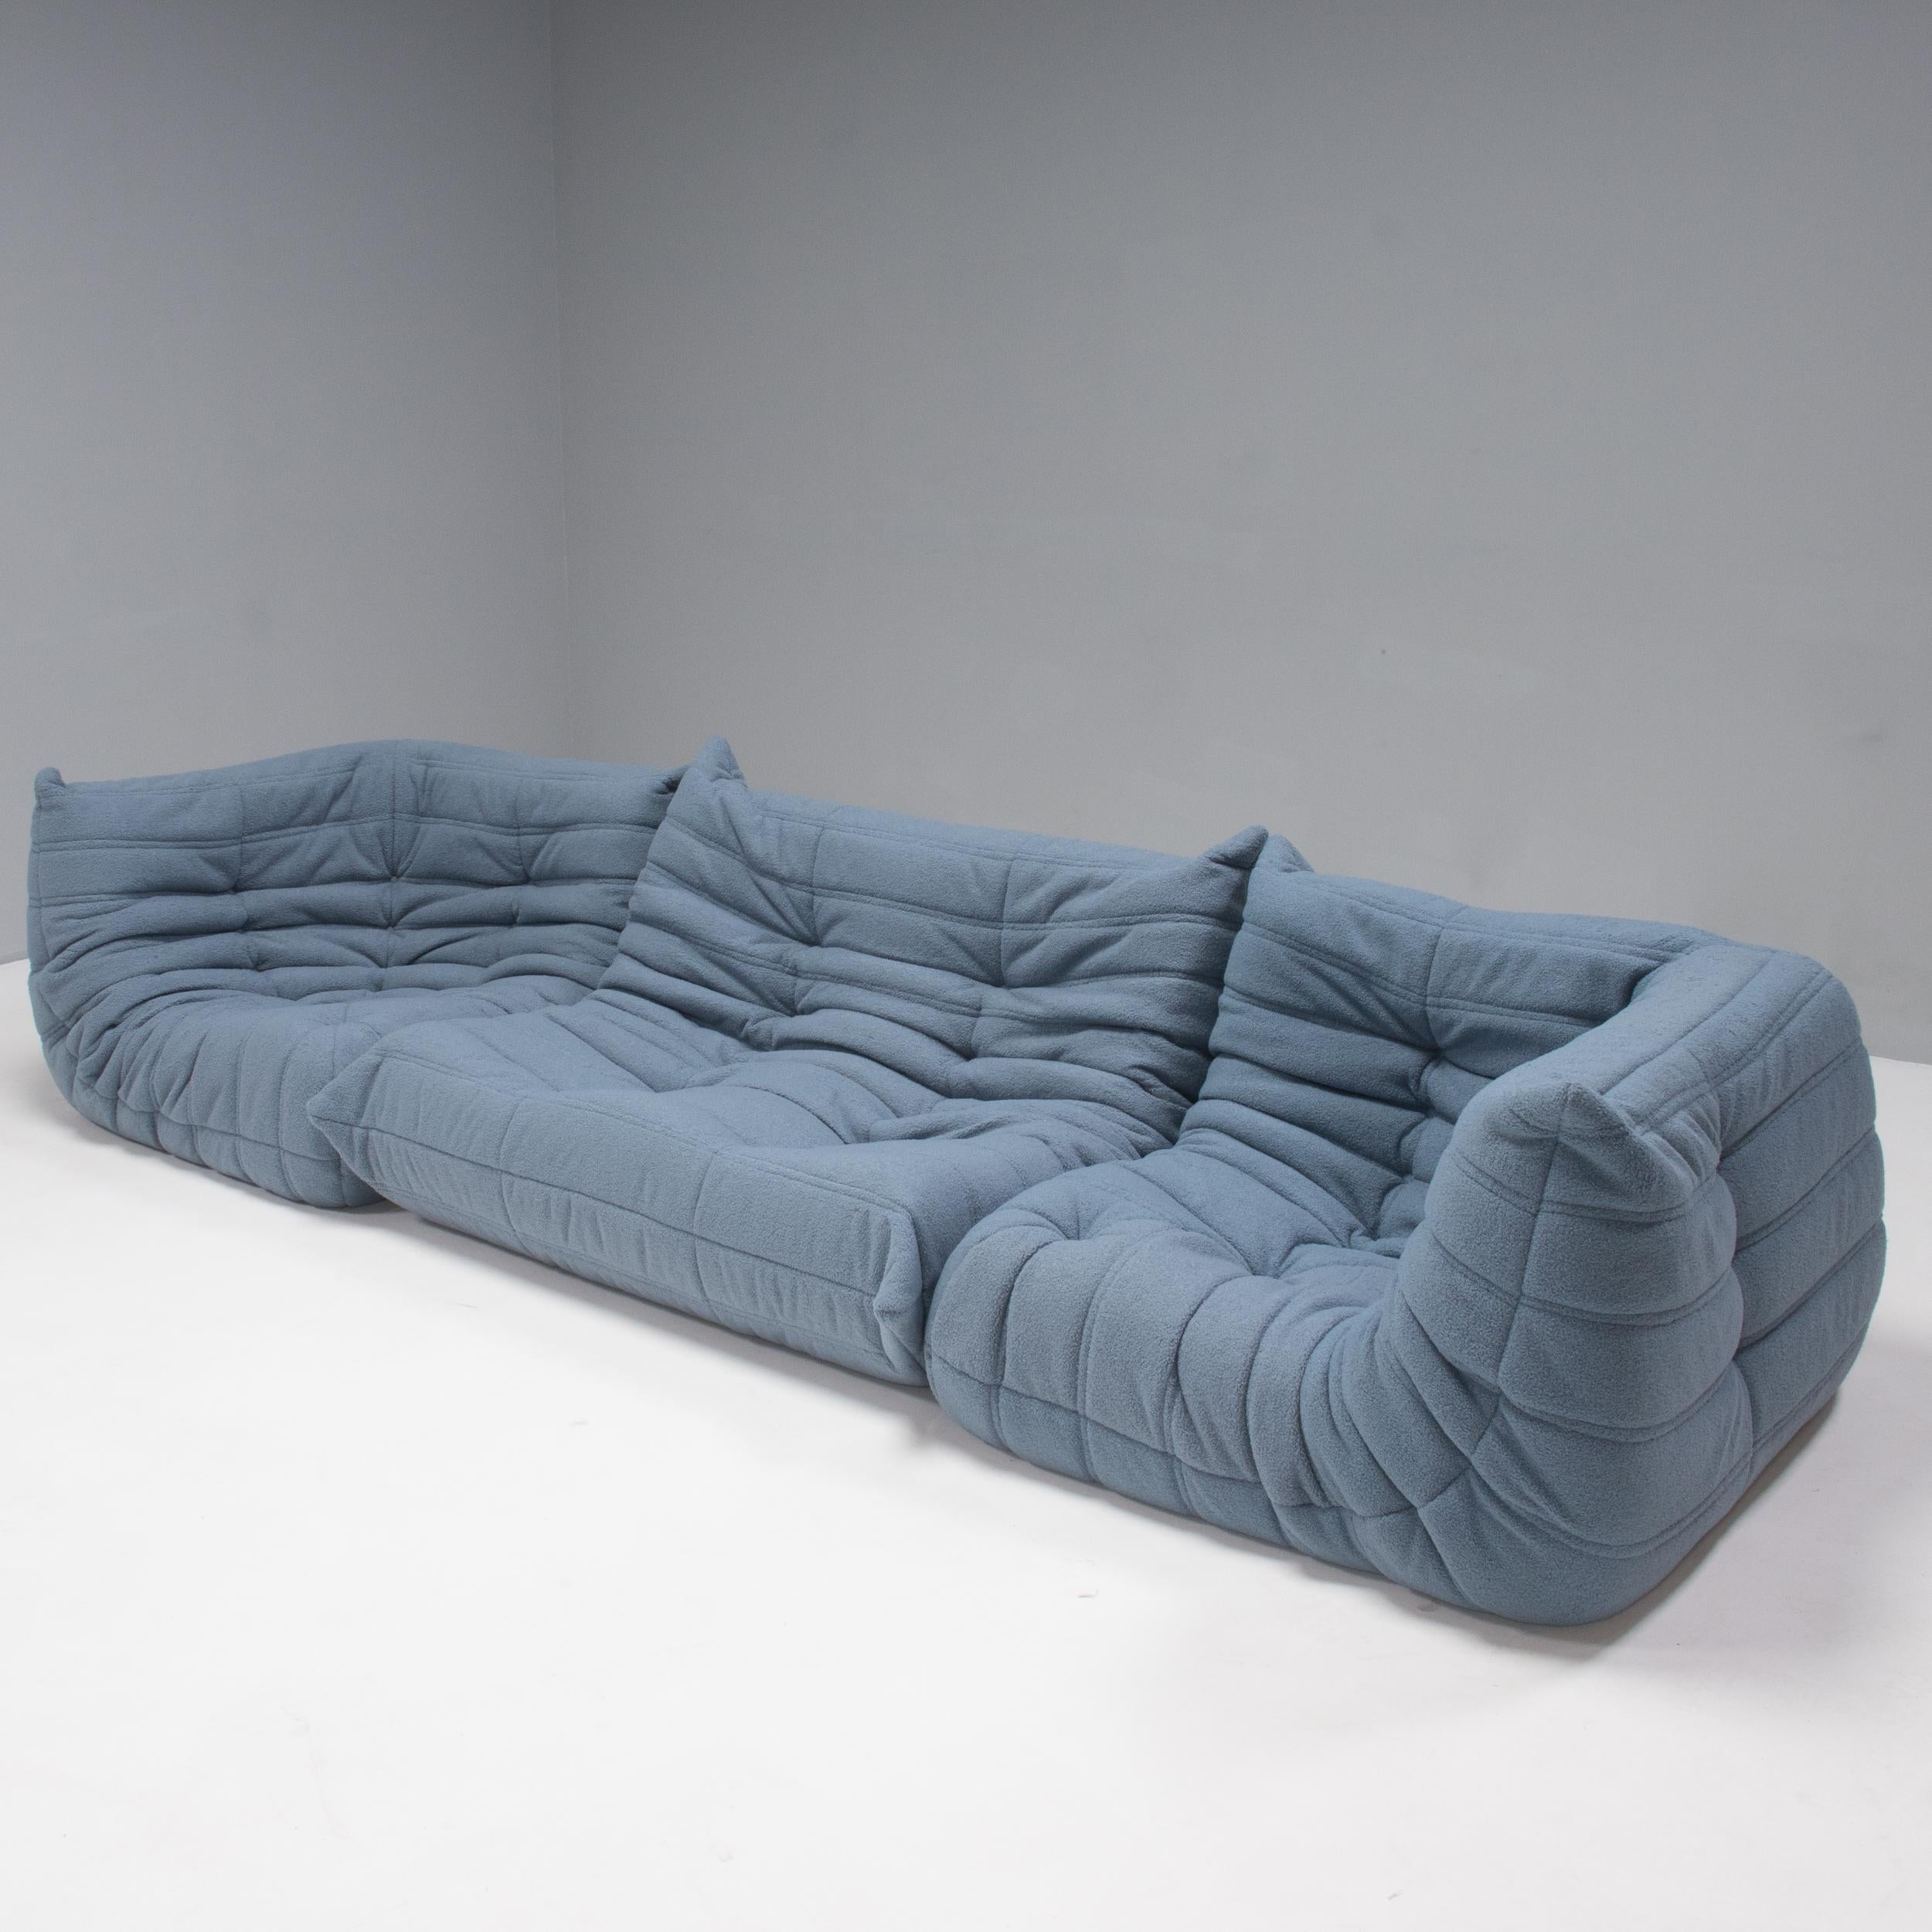 The iconic Togo sofa, originally designed by Michel Ducaroy for Ligne Roset in 1973, has become a design classic. 

These 2-seater sofa and two corners have been newly reupholstered in extra soft blue bouclé fabric and features the instantly